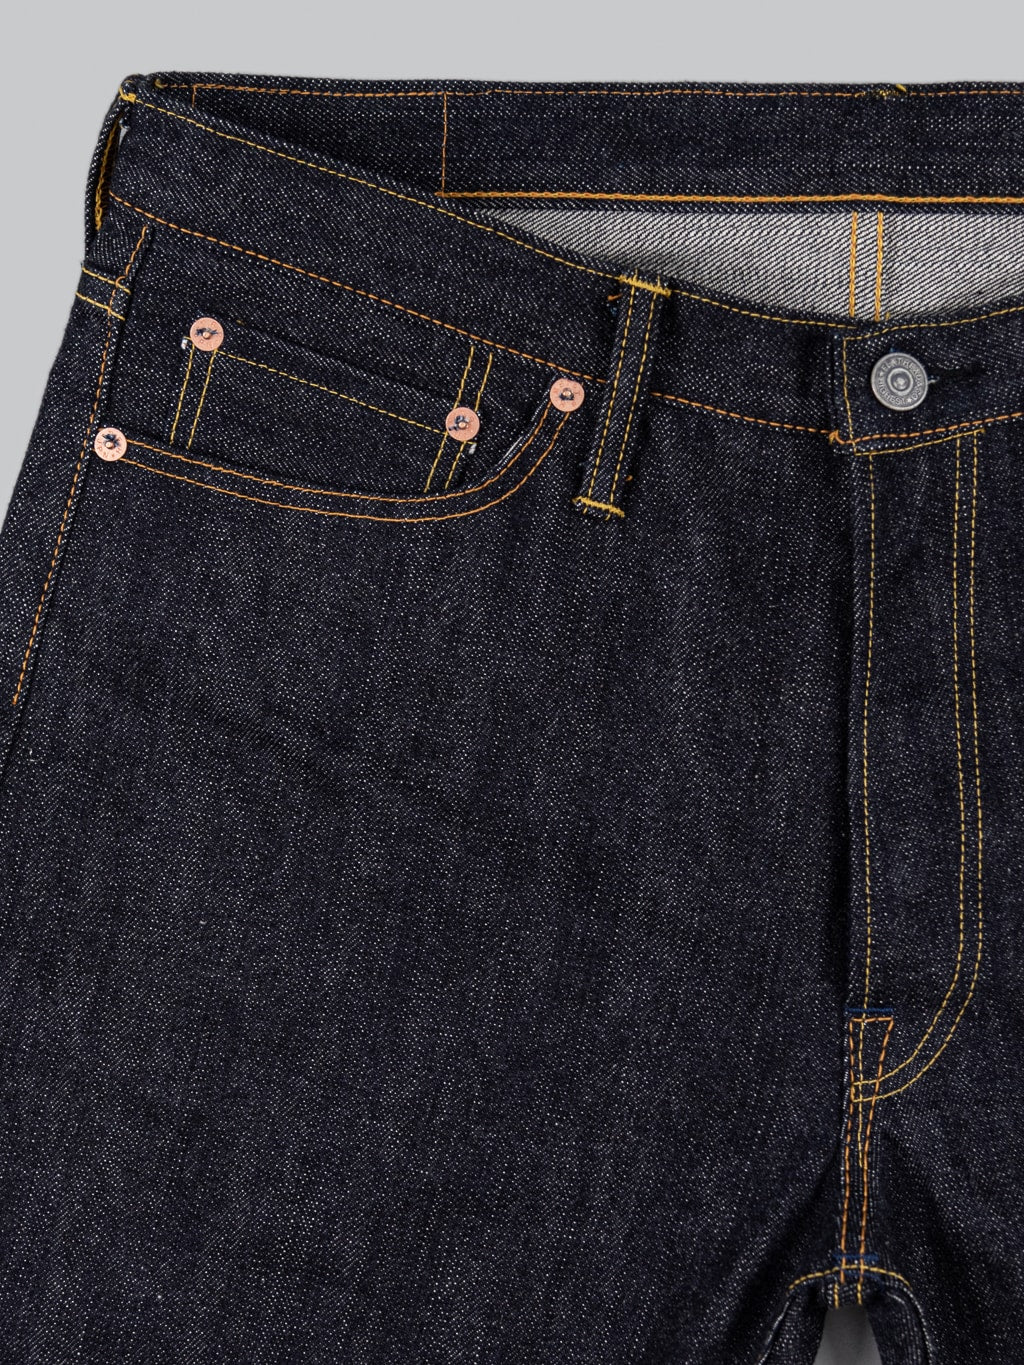 The Flat Head 3002 14.5oz Slim Tapered selvedge Jeans mid rise pocket